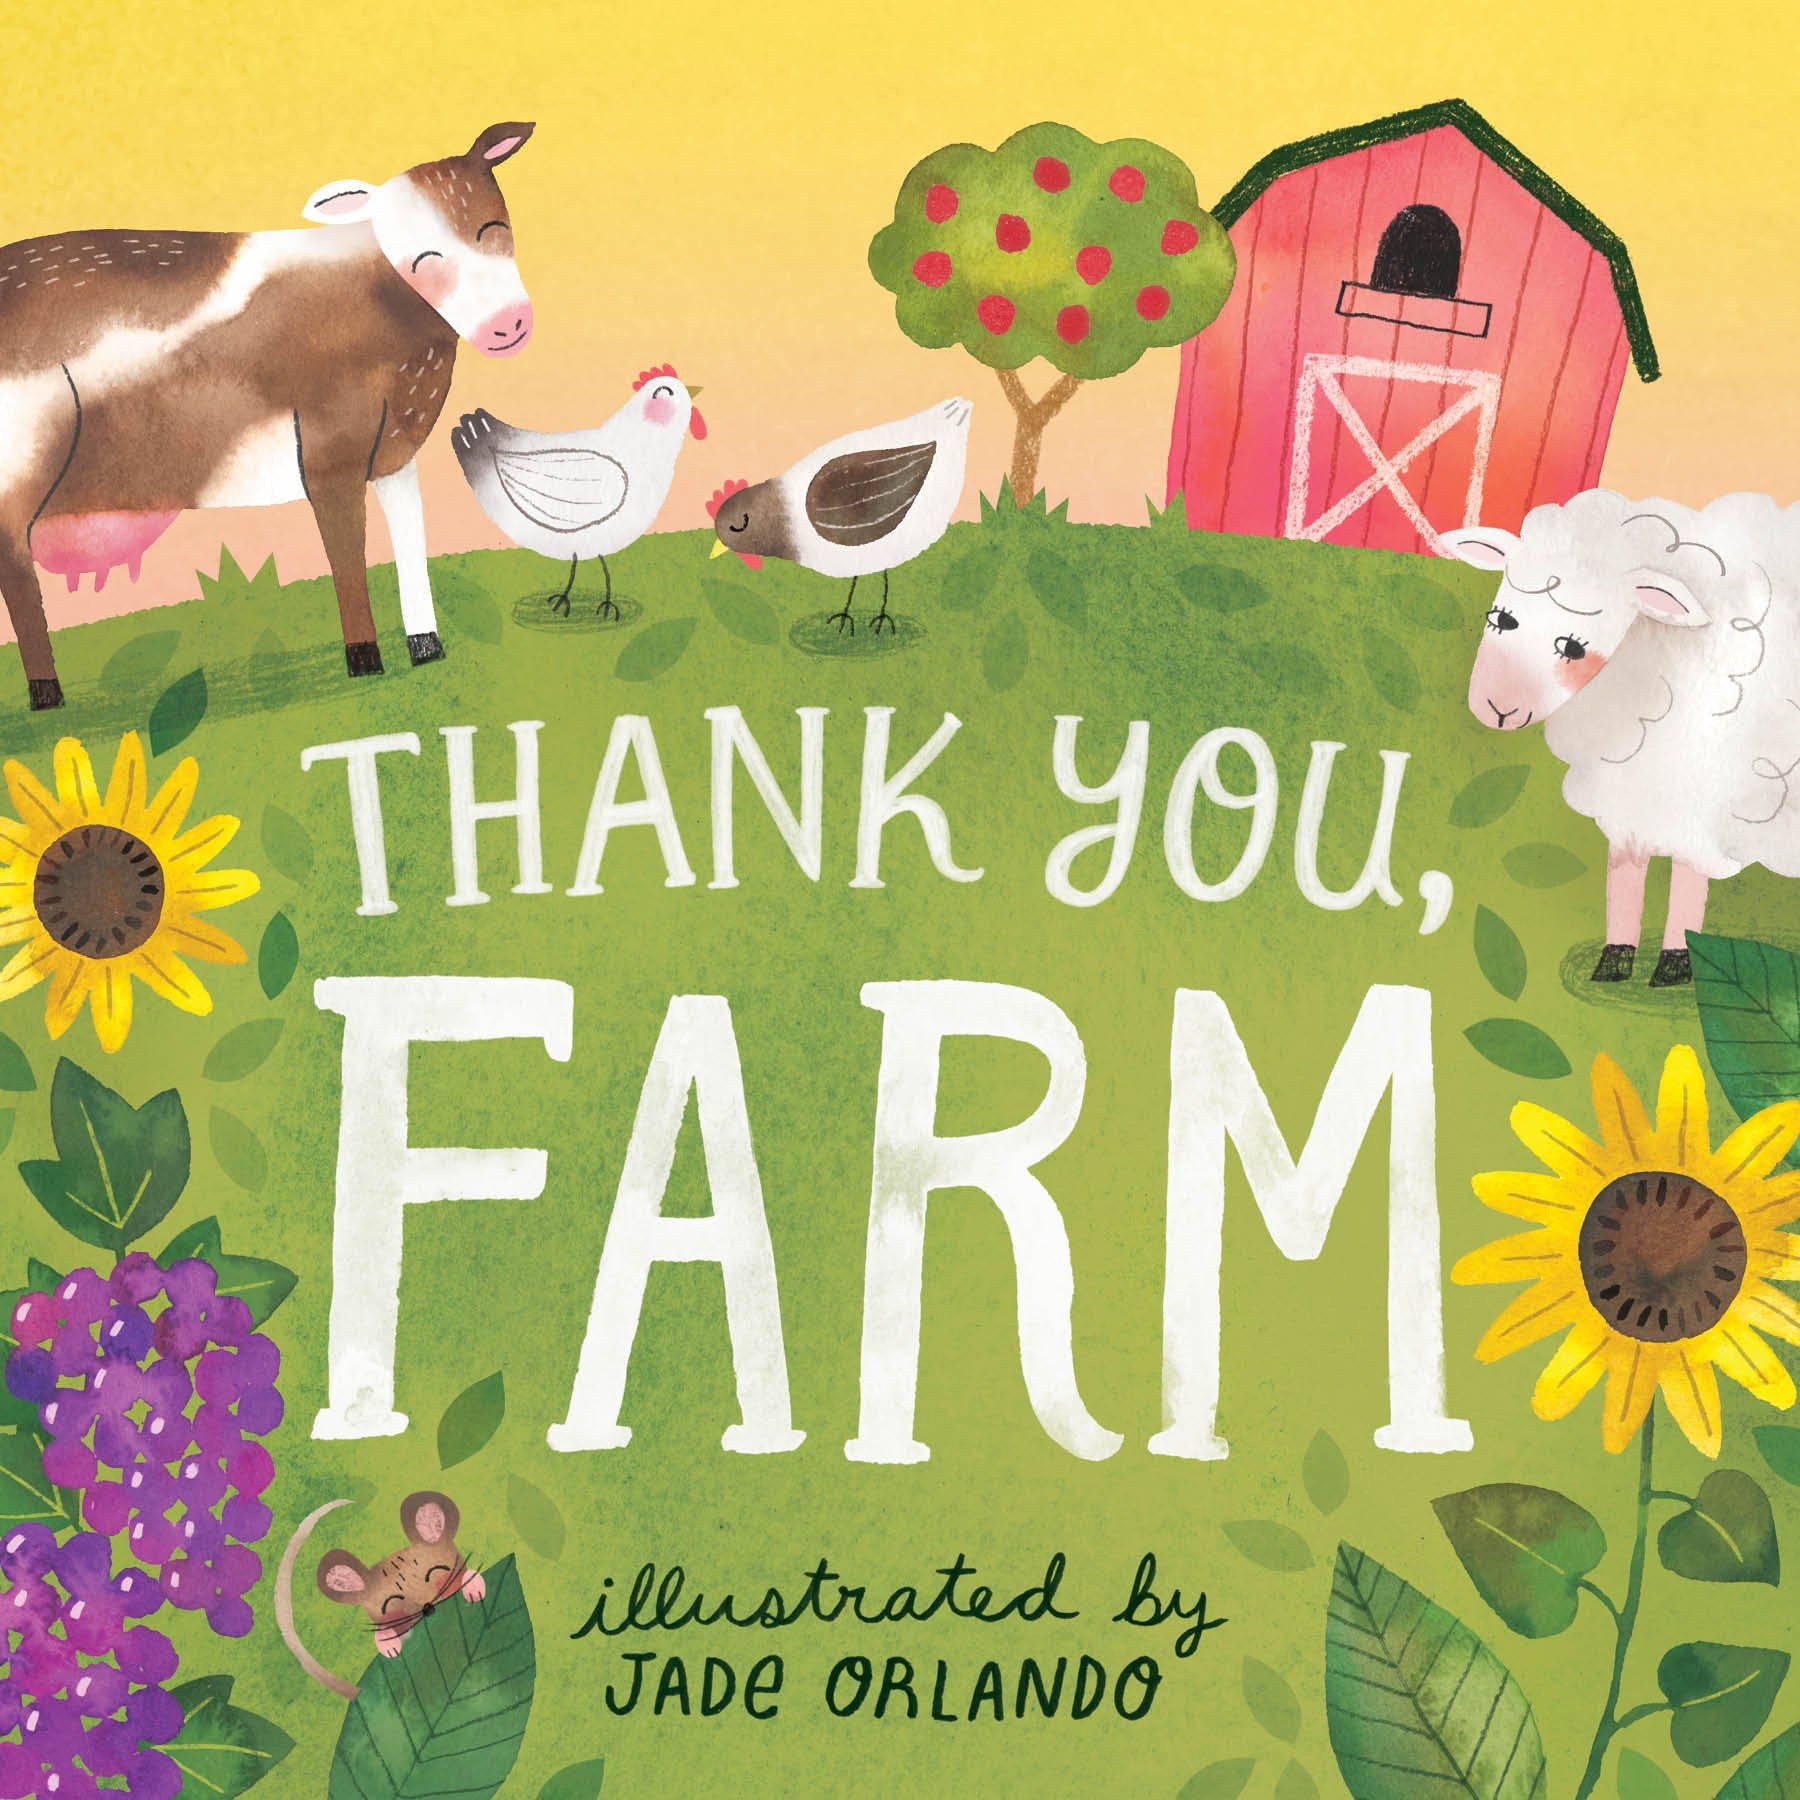 An illustrated book cover with a farm scene. There are chickens, a cow, a sheep, and a mouse along with a red barn and plants.